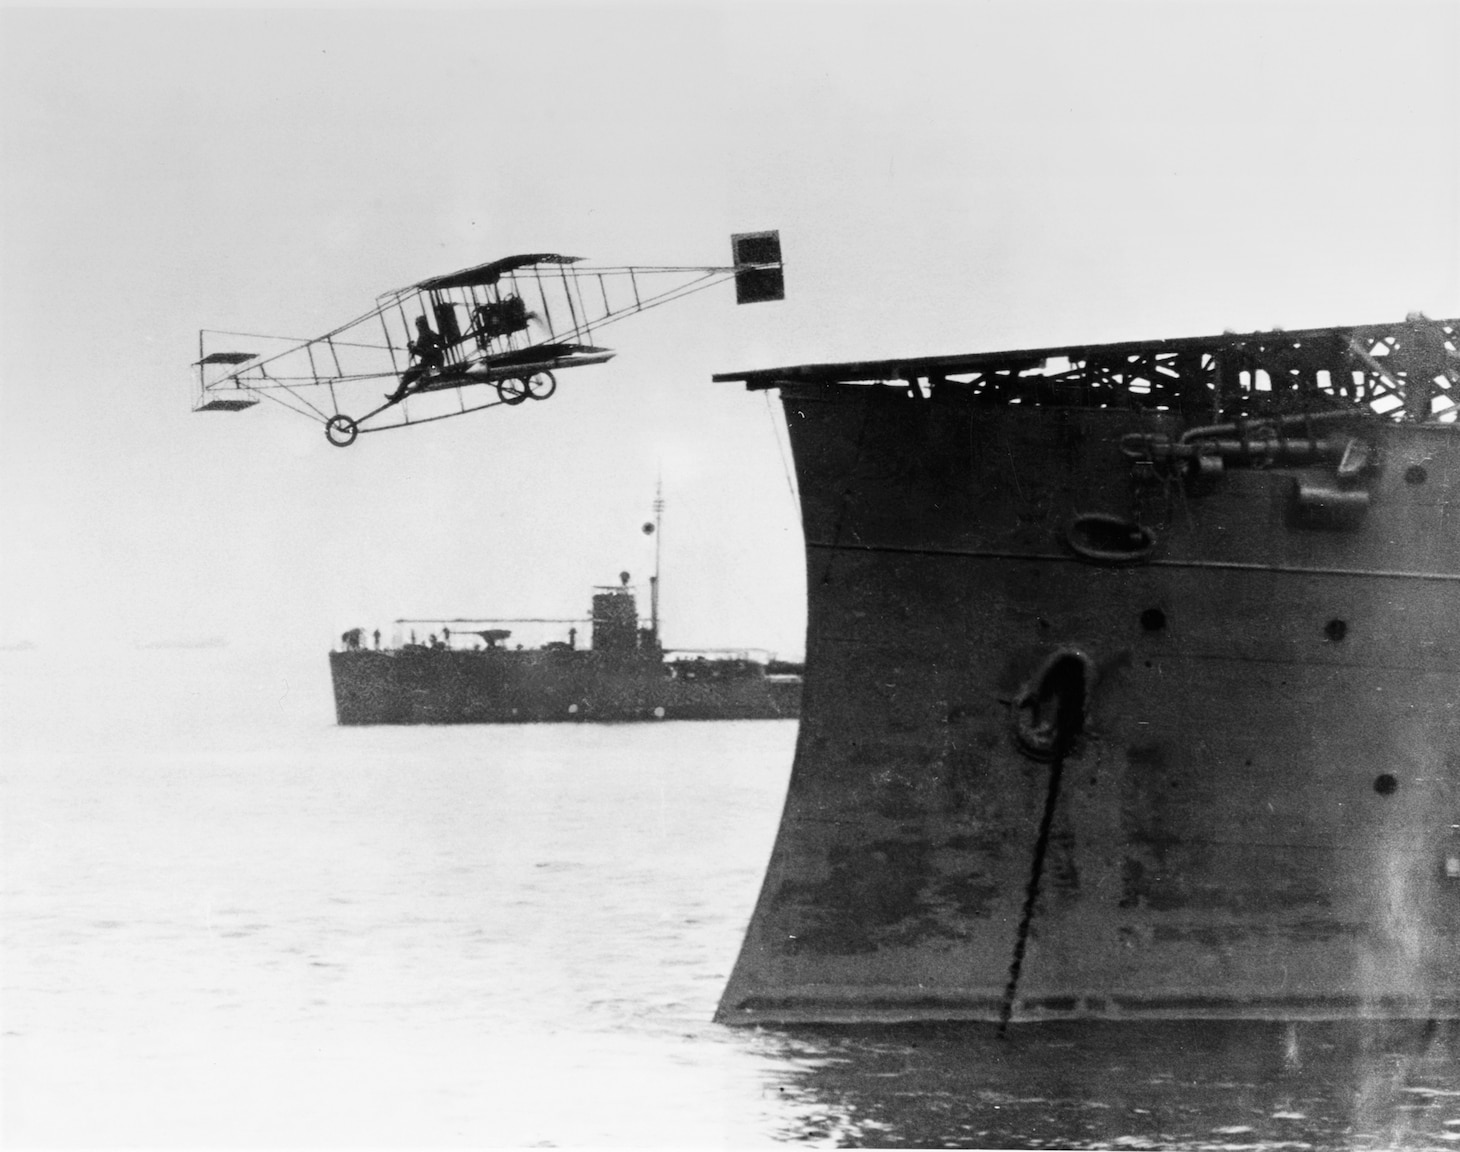 Eugene B. Ely flies his Curtiss pusher airplane from USS Birmingham (Scout Cruiser # 2), in Hampton Roads, Virginia, during the afternoon of 14 November 1910. USS Roe (Destroyer # 24), serving as plane guard, is visible in the background. Photograph from the Eugene B. Ely scrapbook collection, S-005.